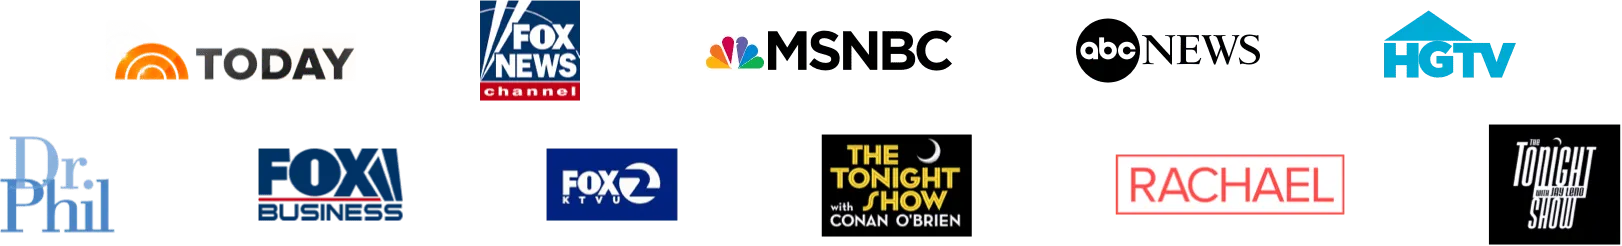 The Today Show, Fox News, MSNBC, ABC News, HGTV, Dr. Phil, Fox Business, KTVU Fox 2, The Tonight Show with Conan O’Brien, The Rachael Ray Show, and The Tonight Show with Jay Leno